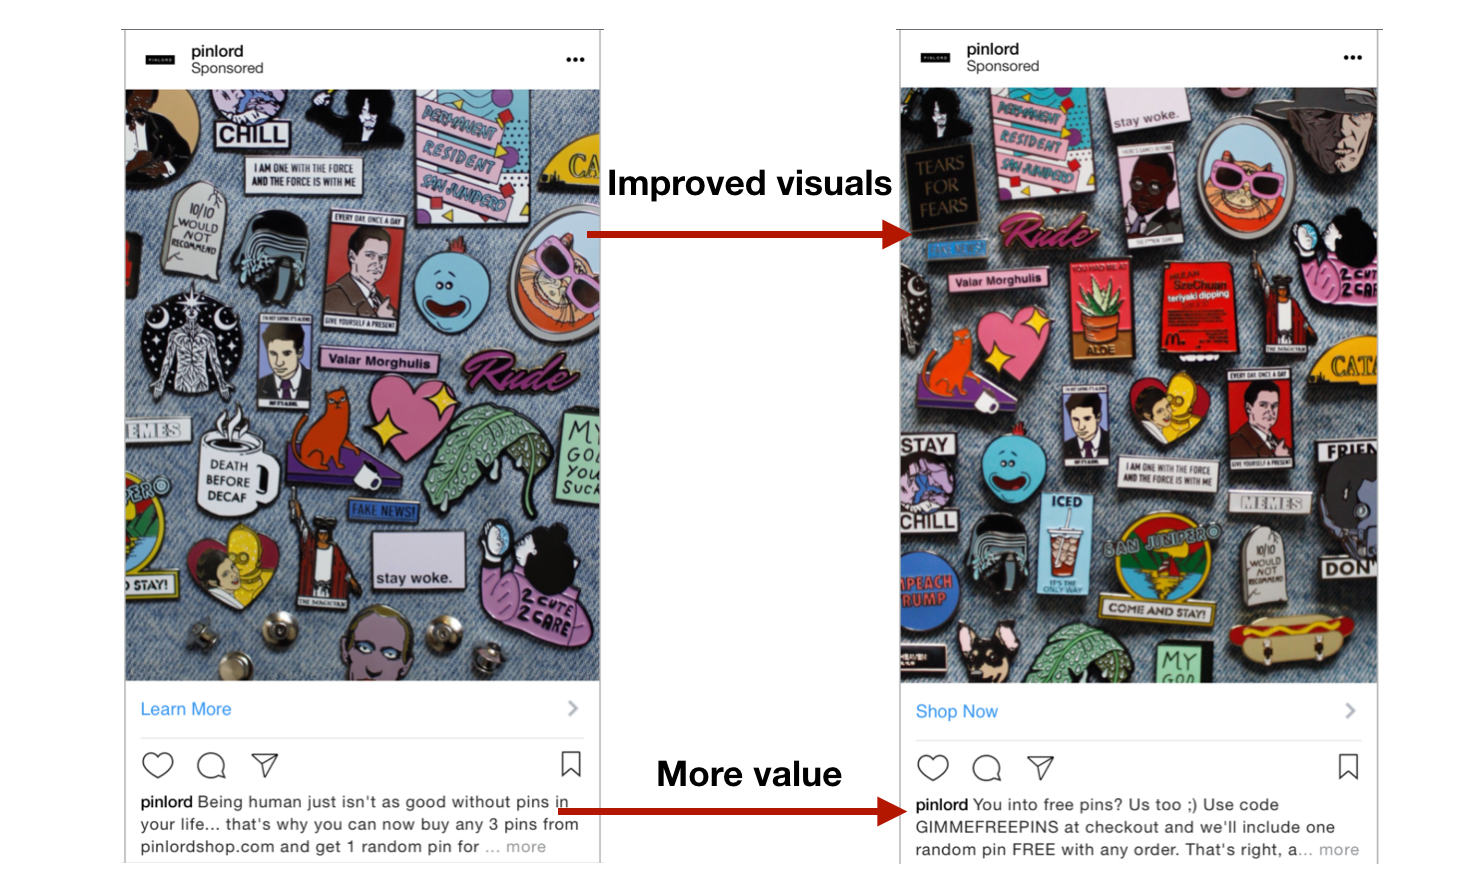 be empathetic when creating sponsored posts ask yourself what sort of ad would make you less annoyed if it came across your home feed - create whitelist of followers instagram